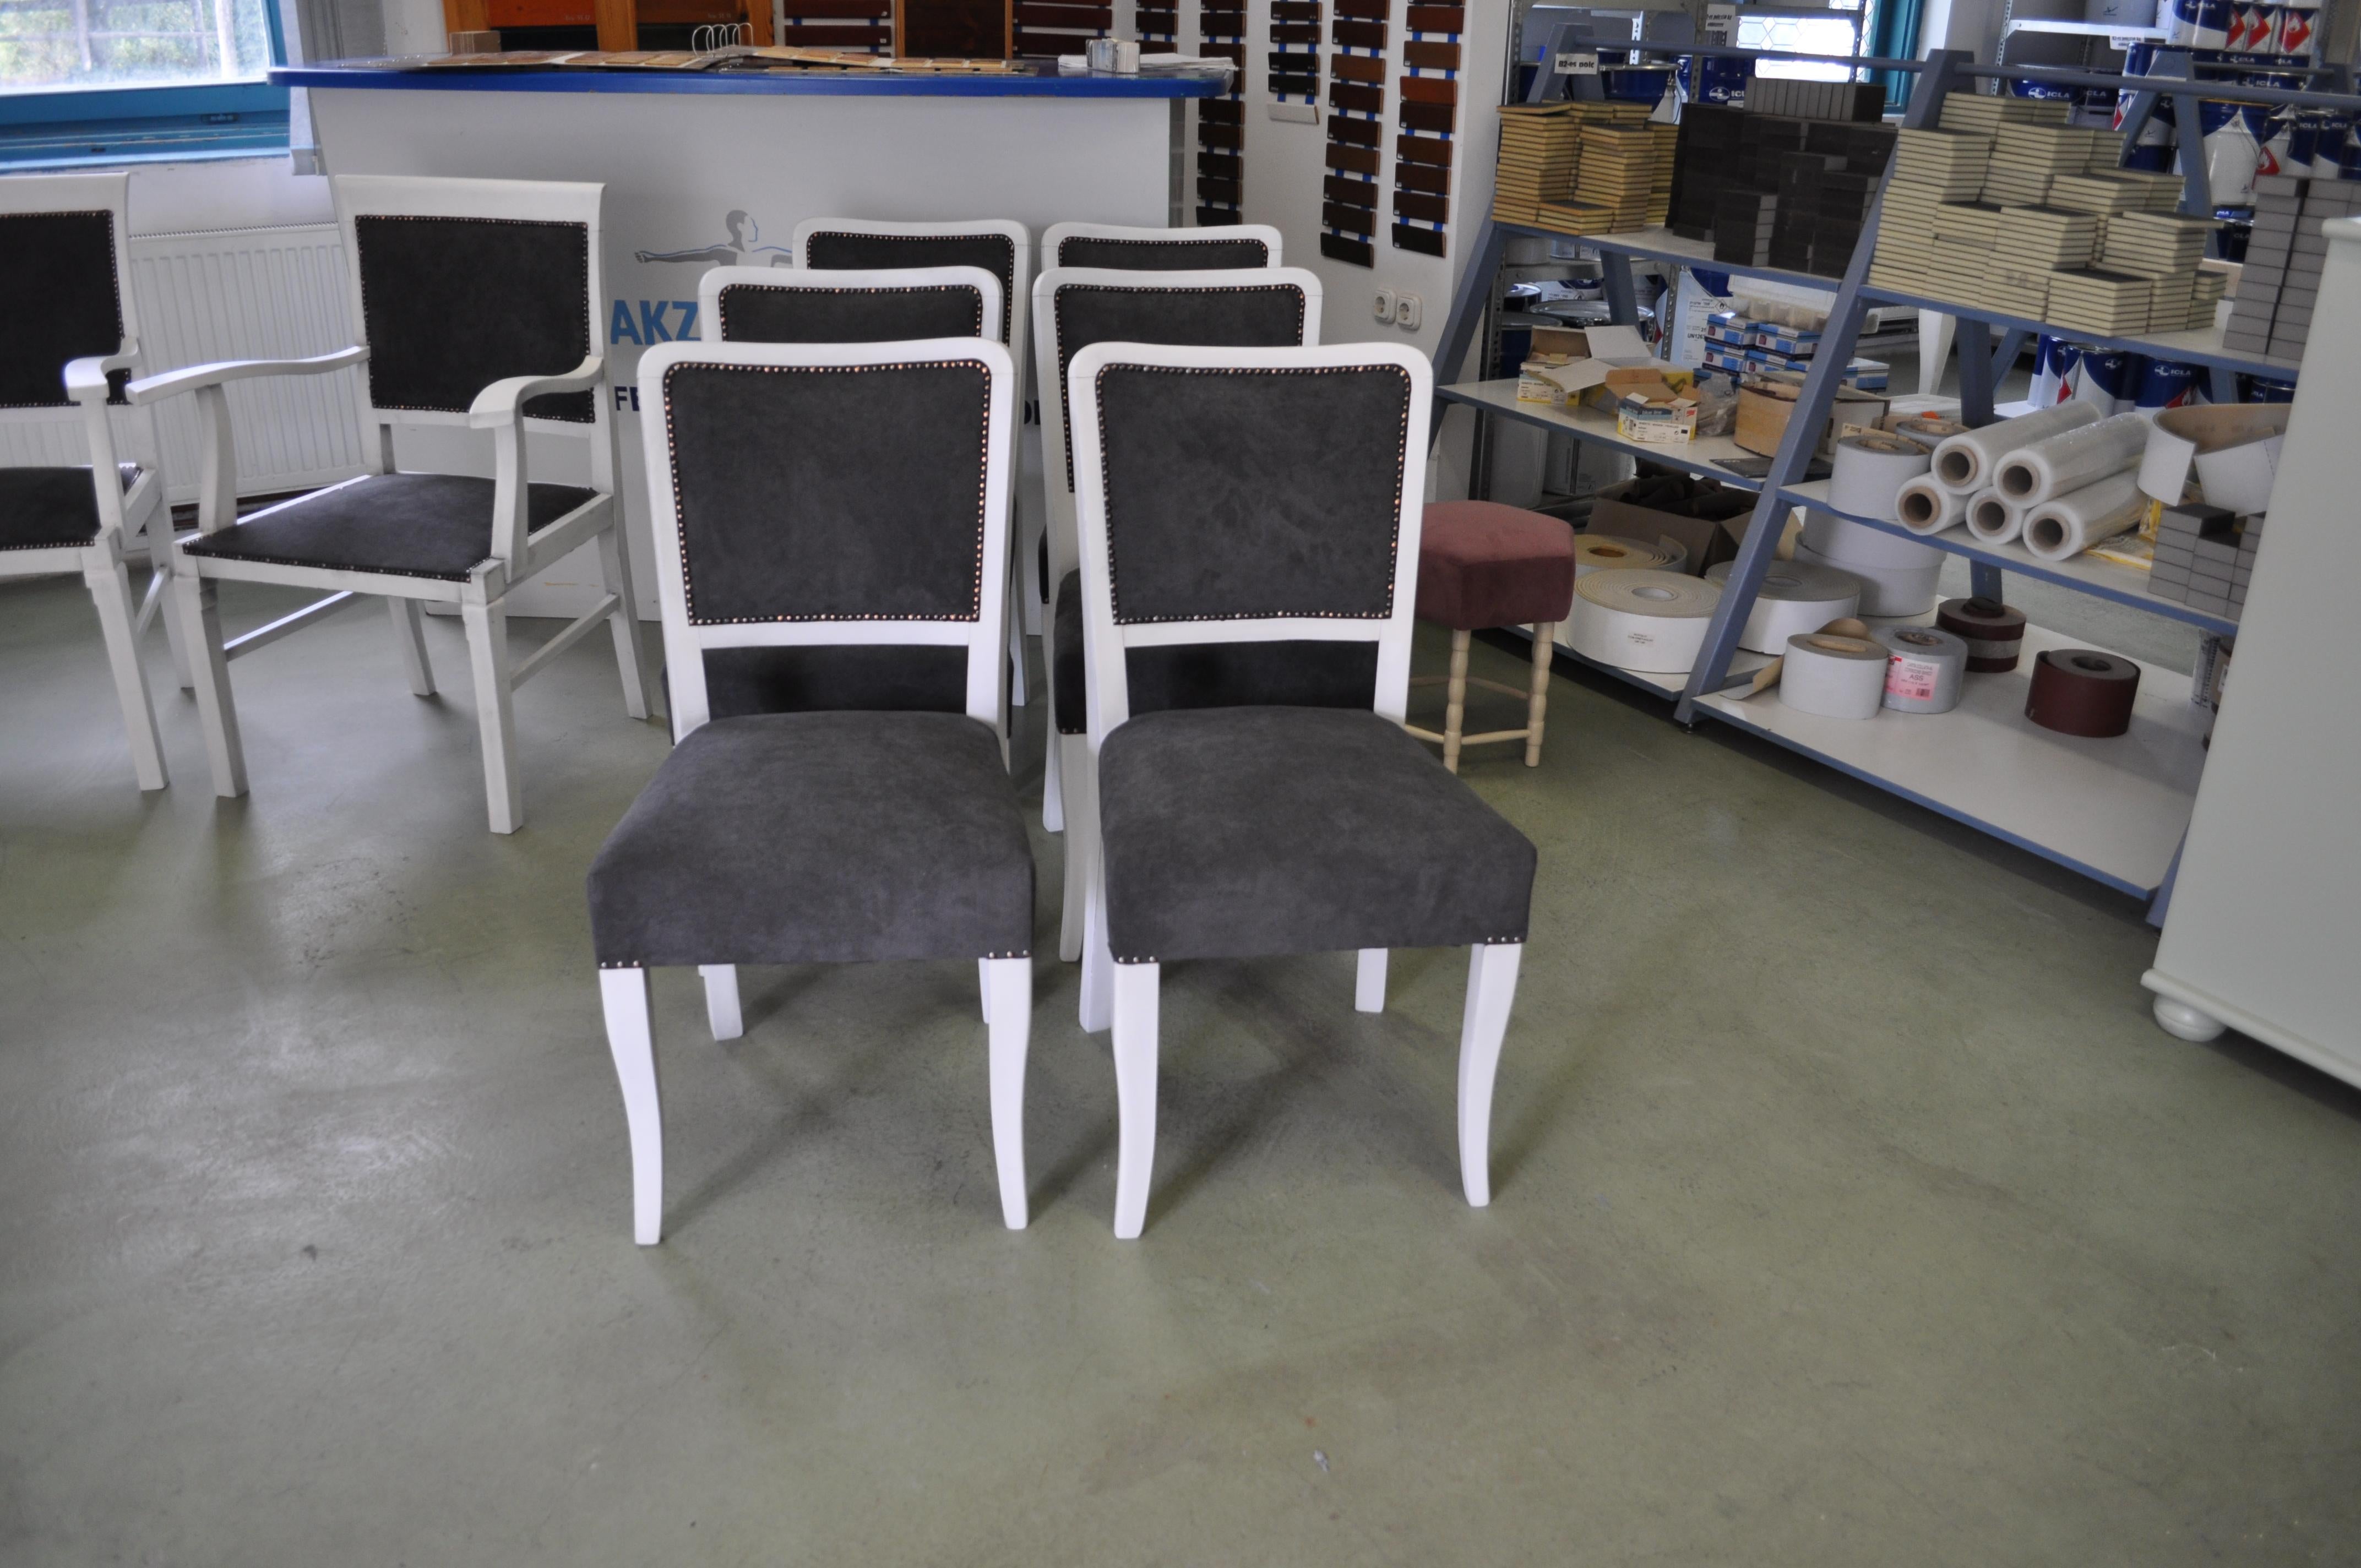 Deco dining chairs, set of 6
Set of 6 Art Deco dining chairs.
These Art Deco chairs are in their, painted, upholstered, restored condition.
A lovely matching set of 6 genuine 1920s-1930s Art Deco dining chairs from Hungary.
White matt wood and